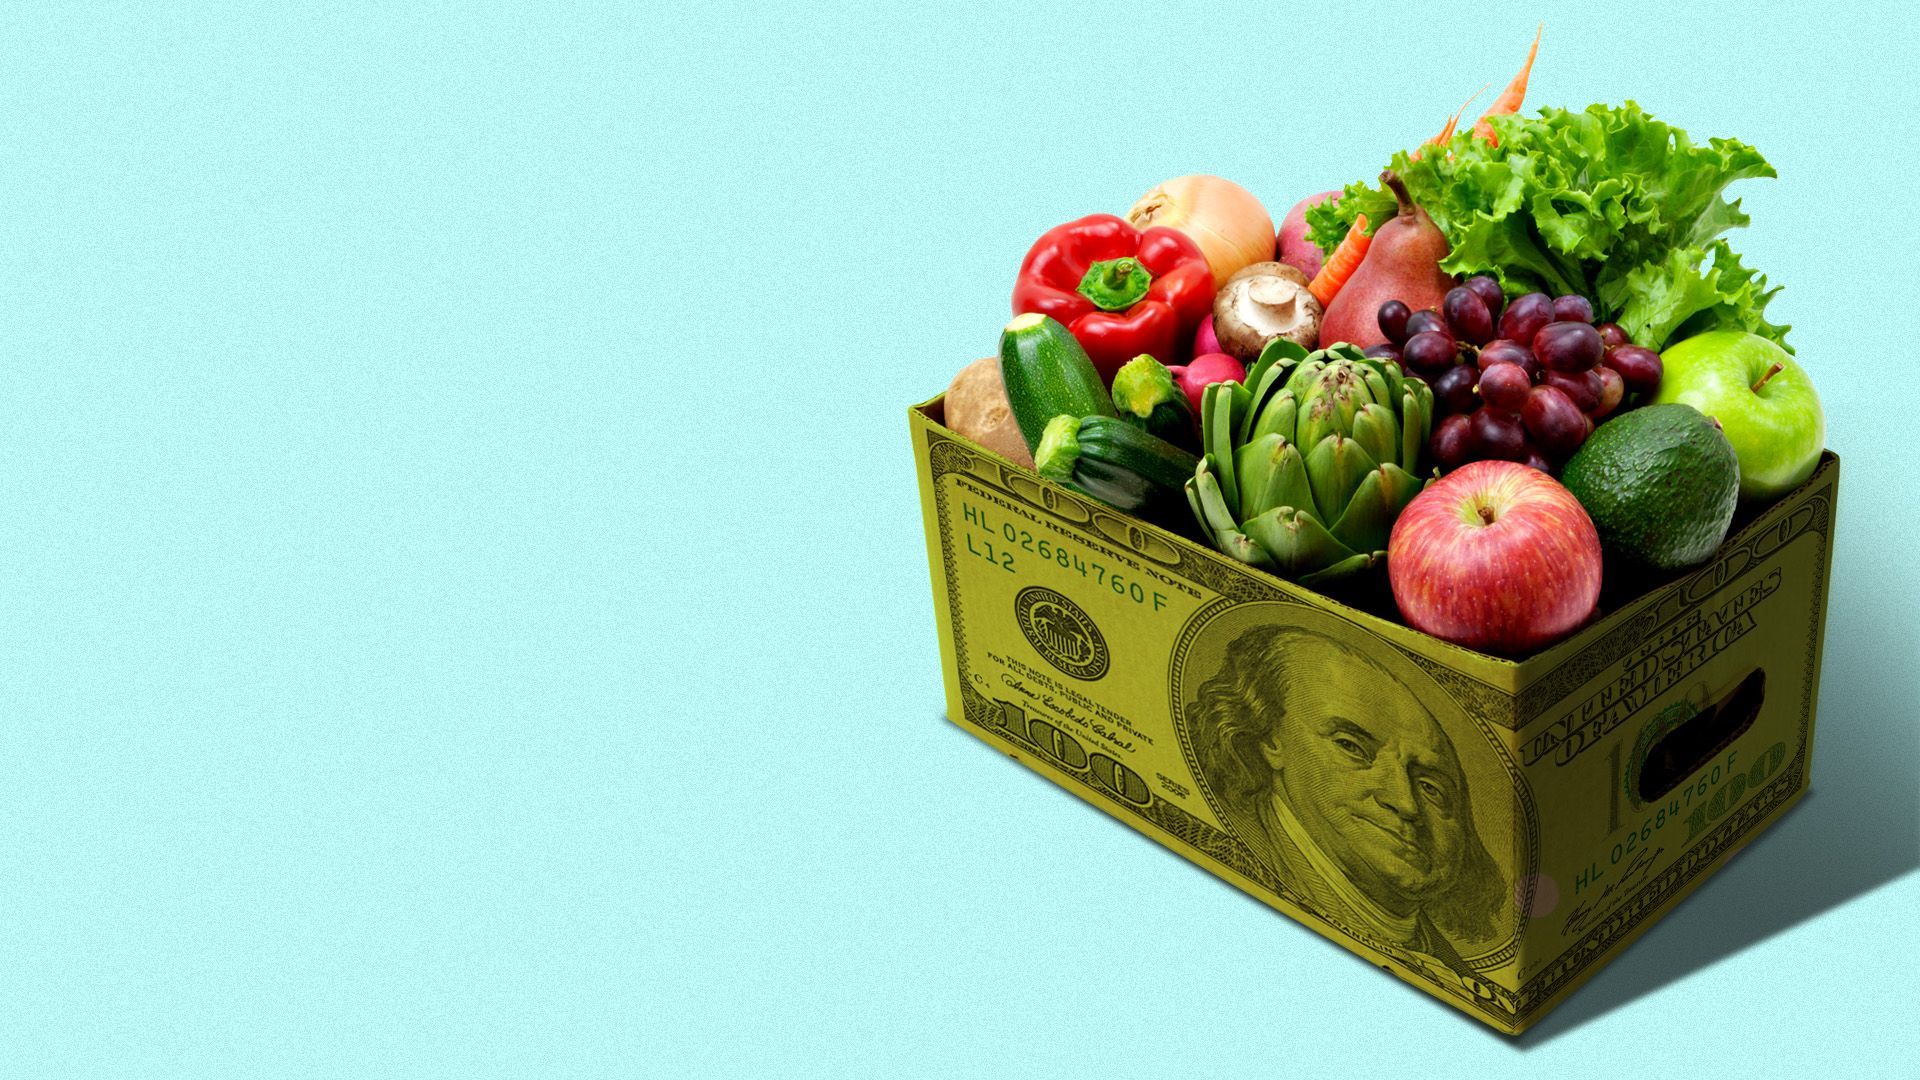 Illustration of a hundred dollar bill-shaped box filled with produce